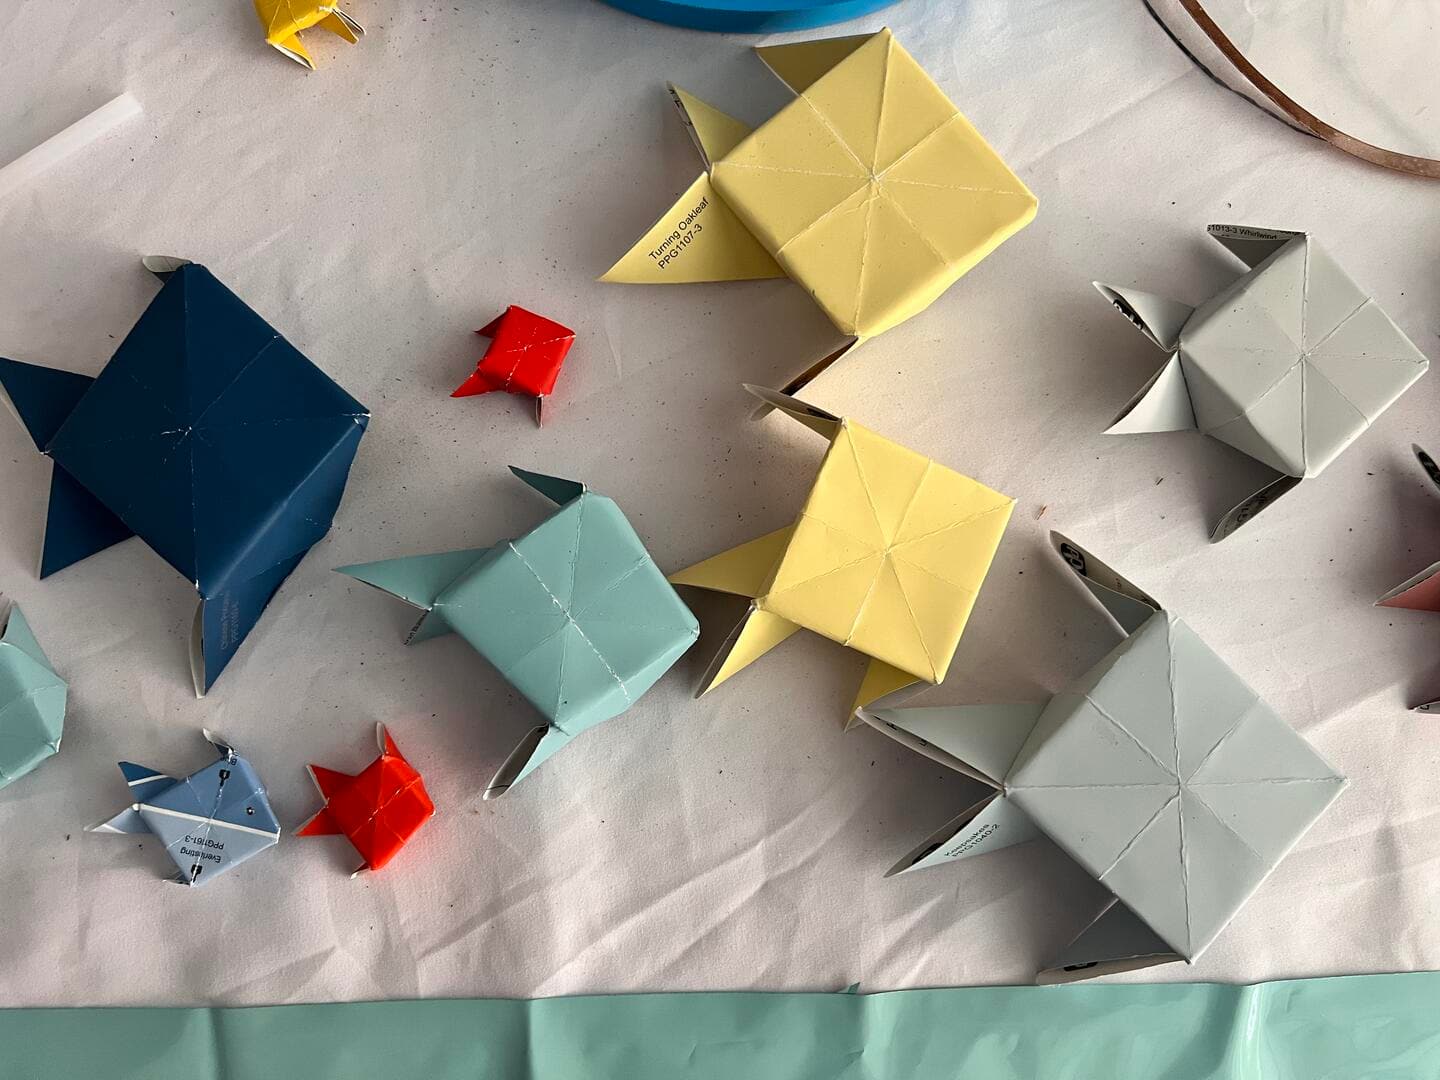 Overview of the origami fish.